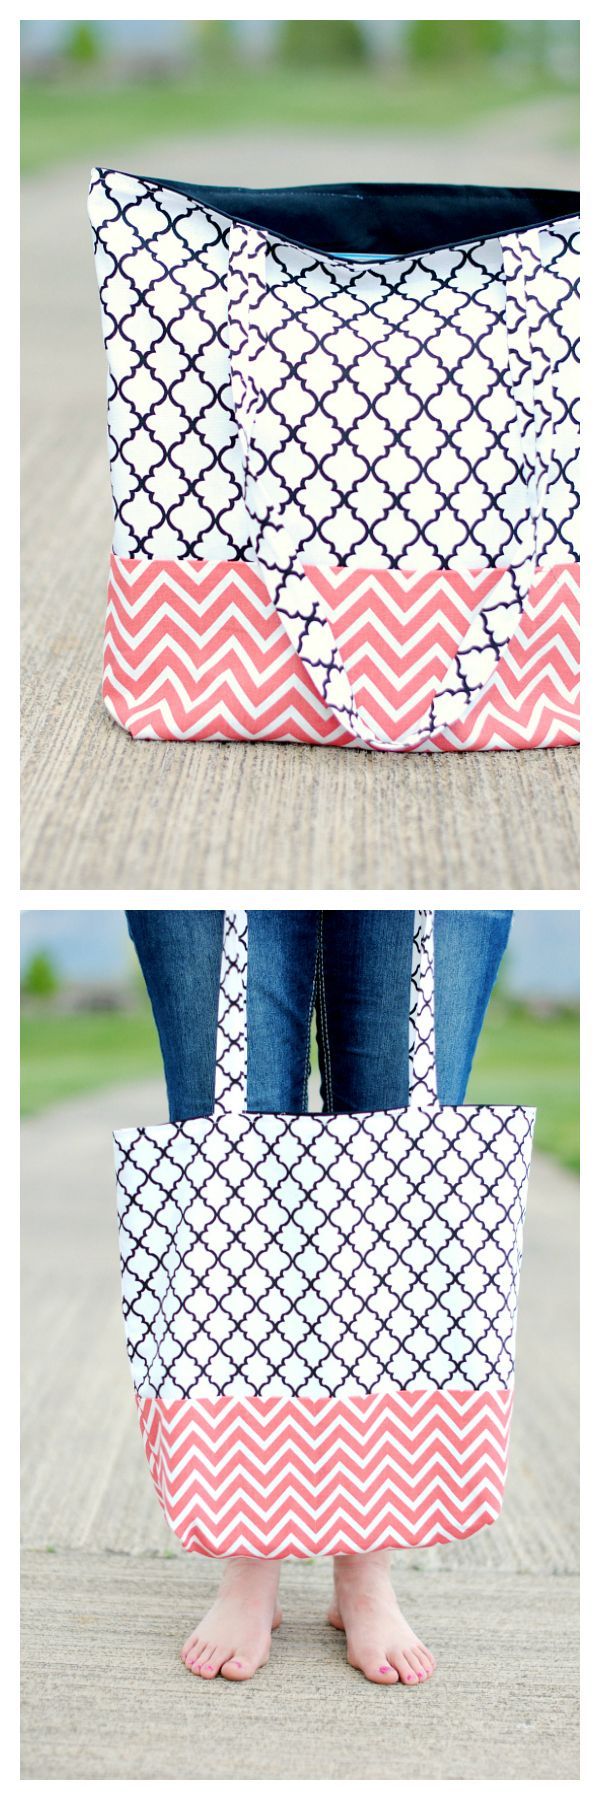 Simple Tote Bag Pattern! Love this cute tote! Sewing pattern and tutorial.